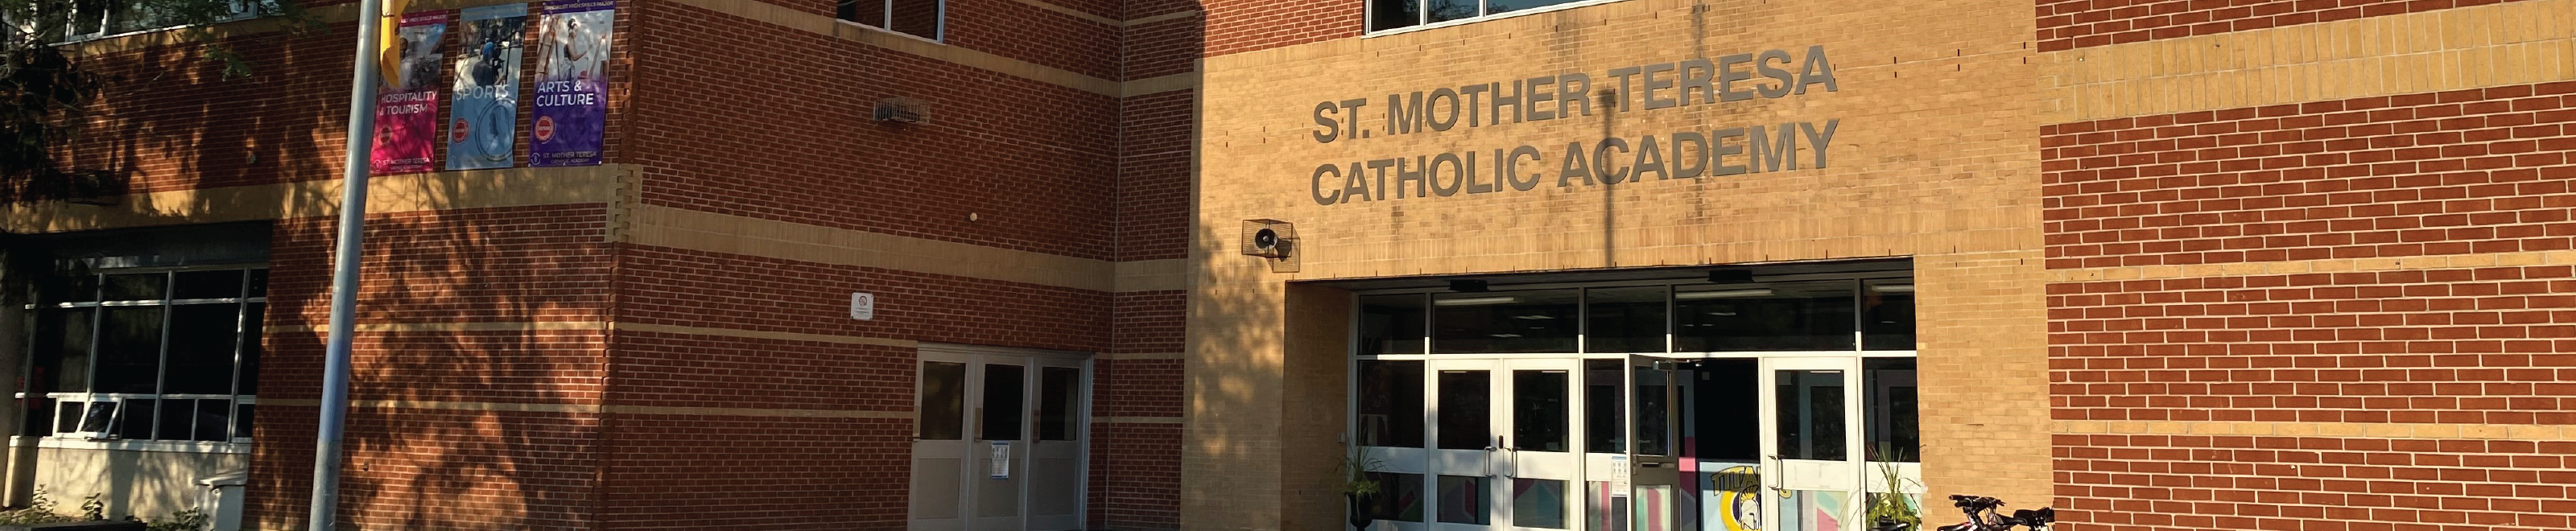 The front entrance of St. Mother Teresa Catholic Academy.